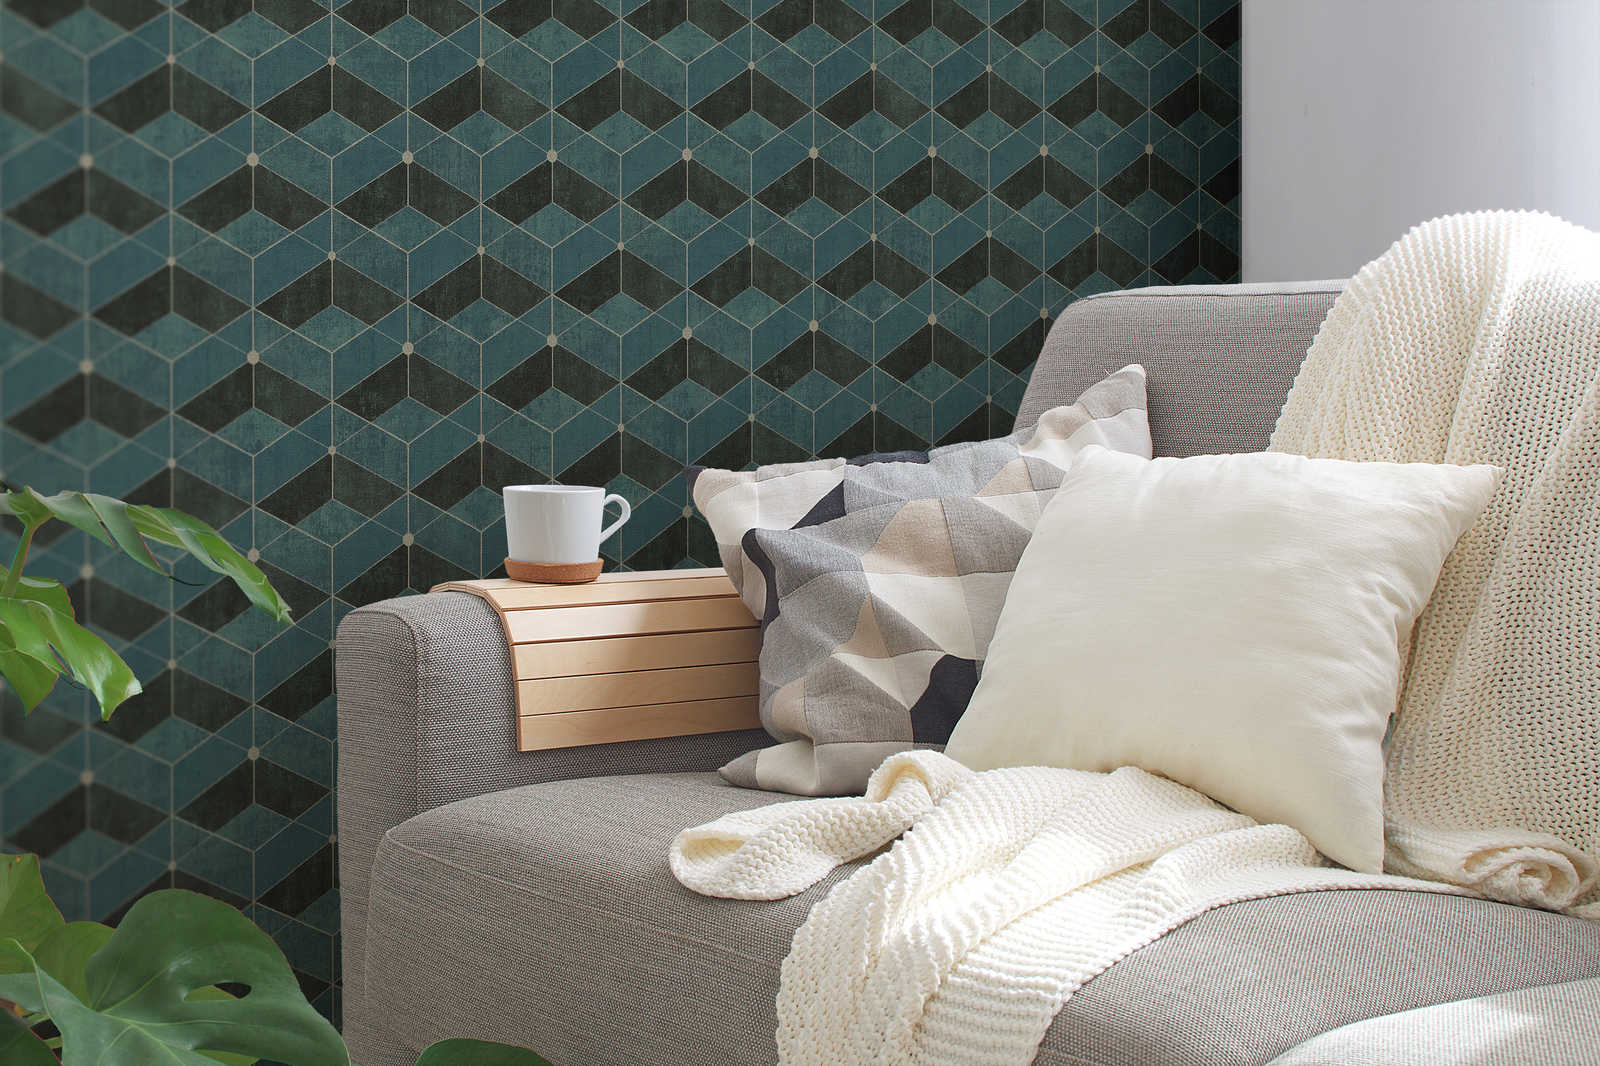             Petrol wallpaper with graphic pattern & metallic accent - blue, green, black
        